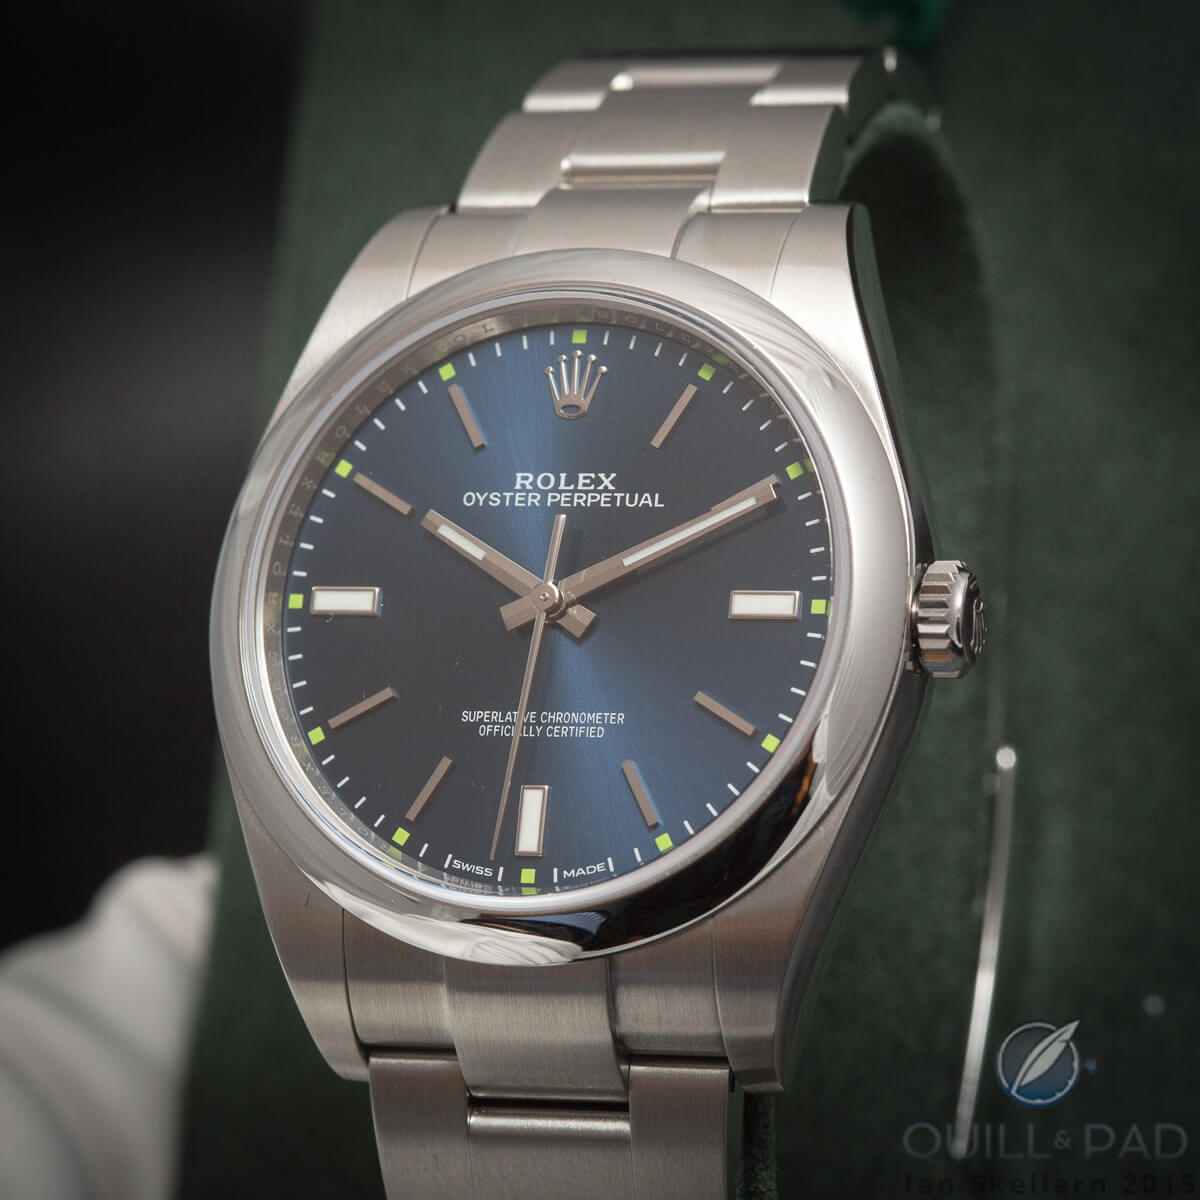 Rolex Oyster Perpetual with blue dial